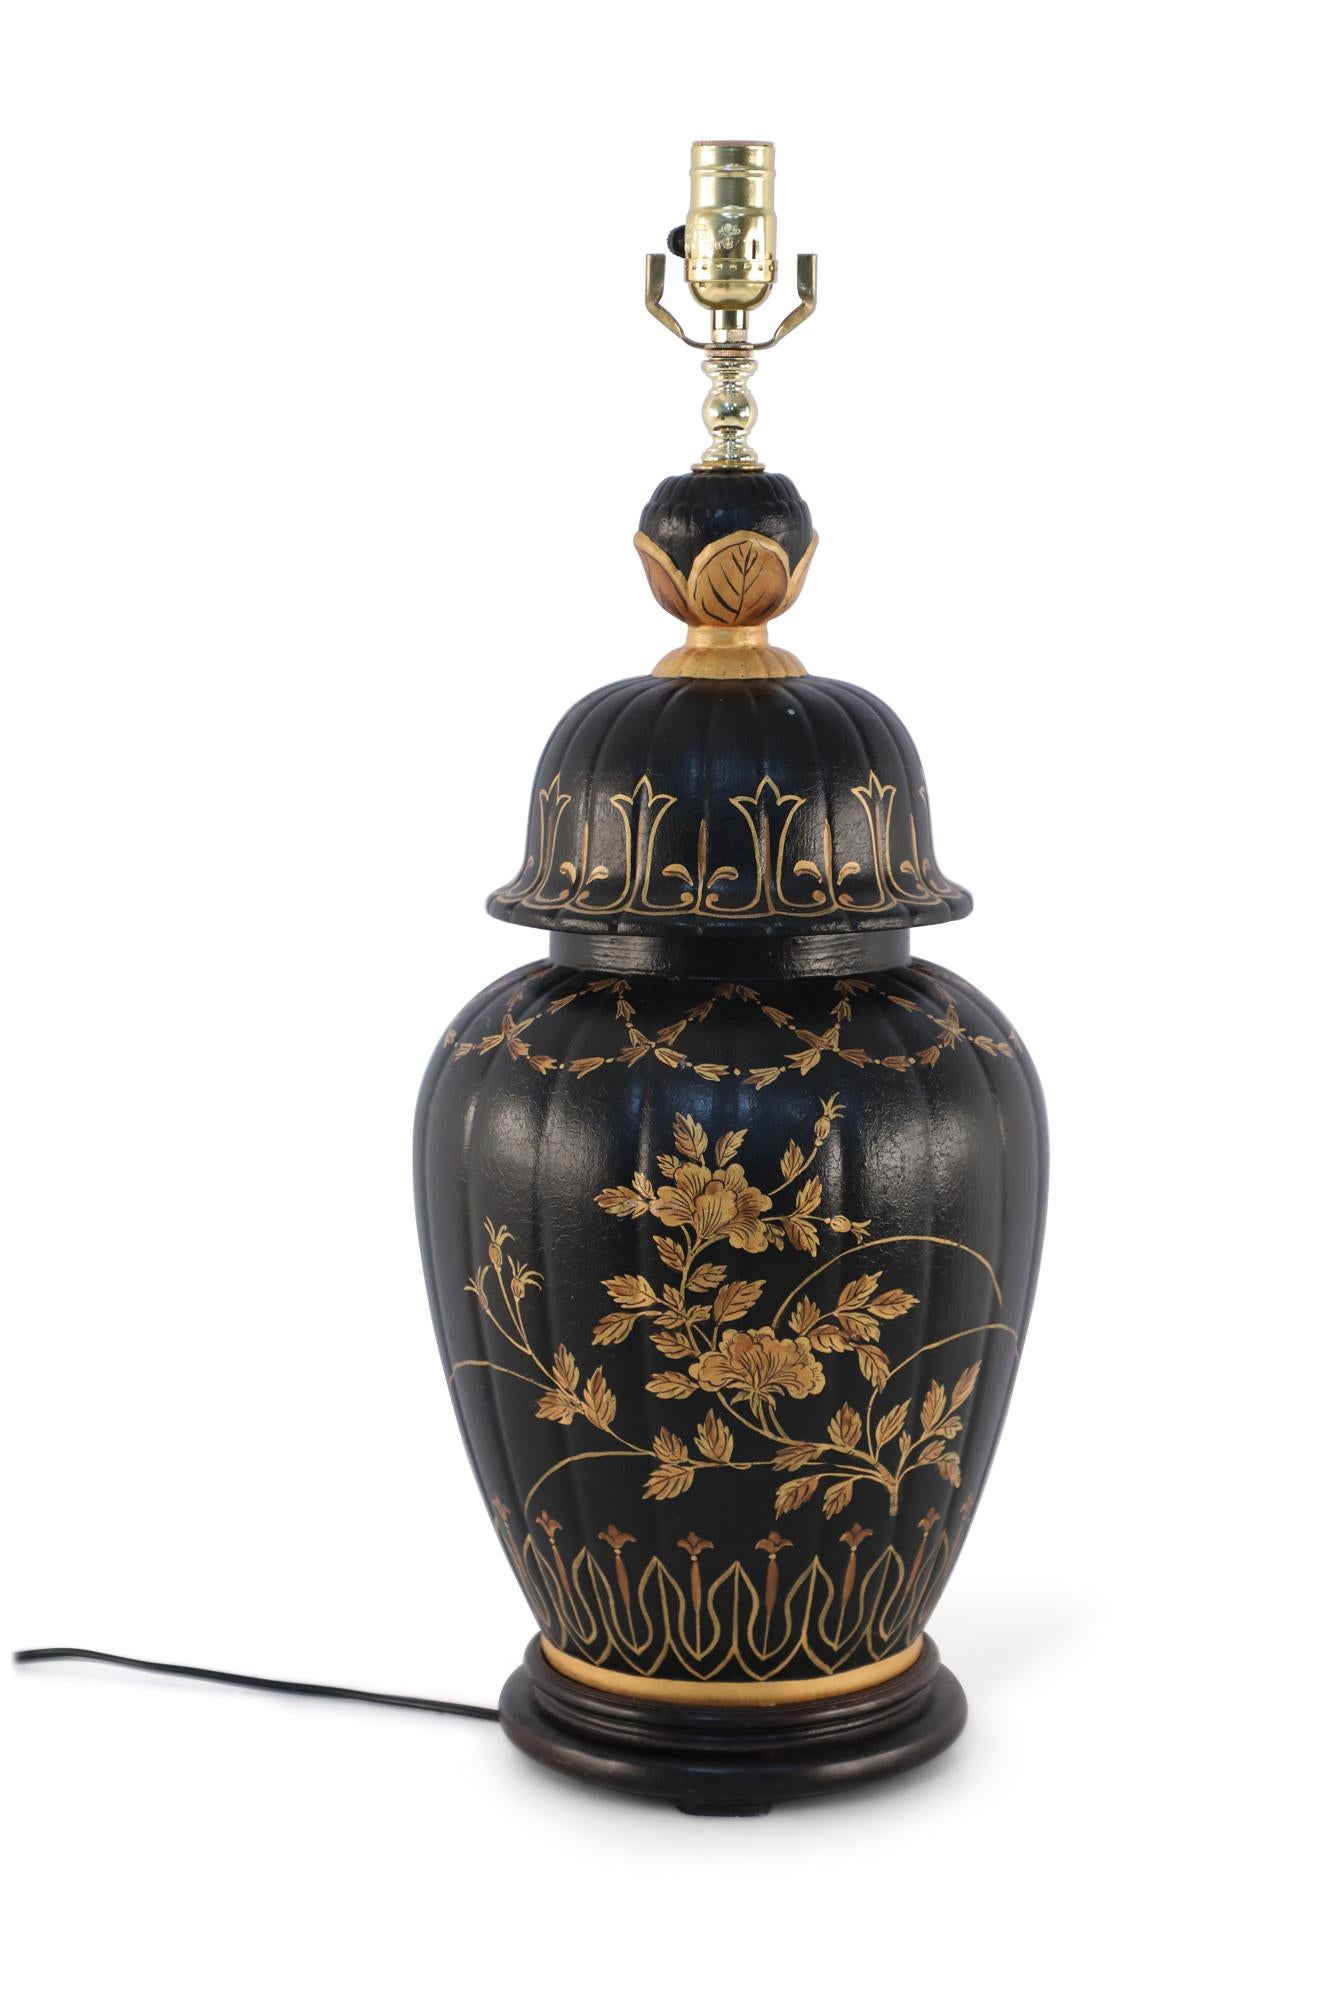 20th Century Chinese Regency Style Black and Gold Floral Lidded Urn Porcelain Table Lamp For Sale